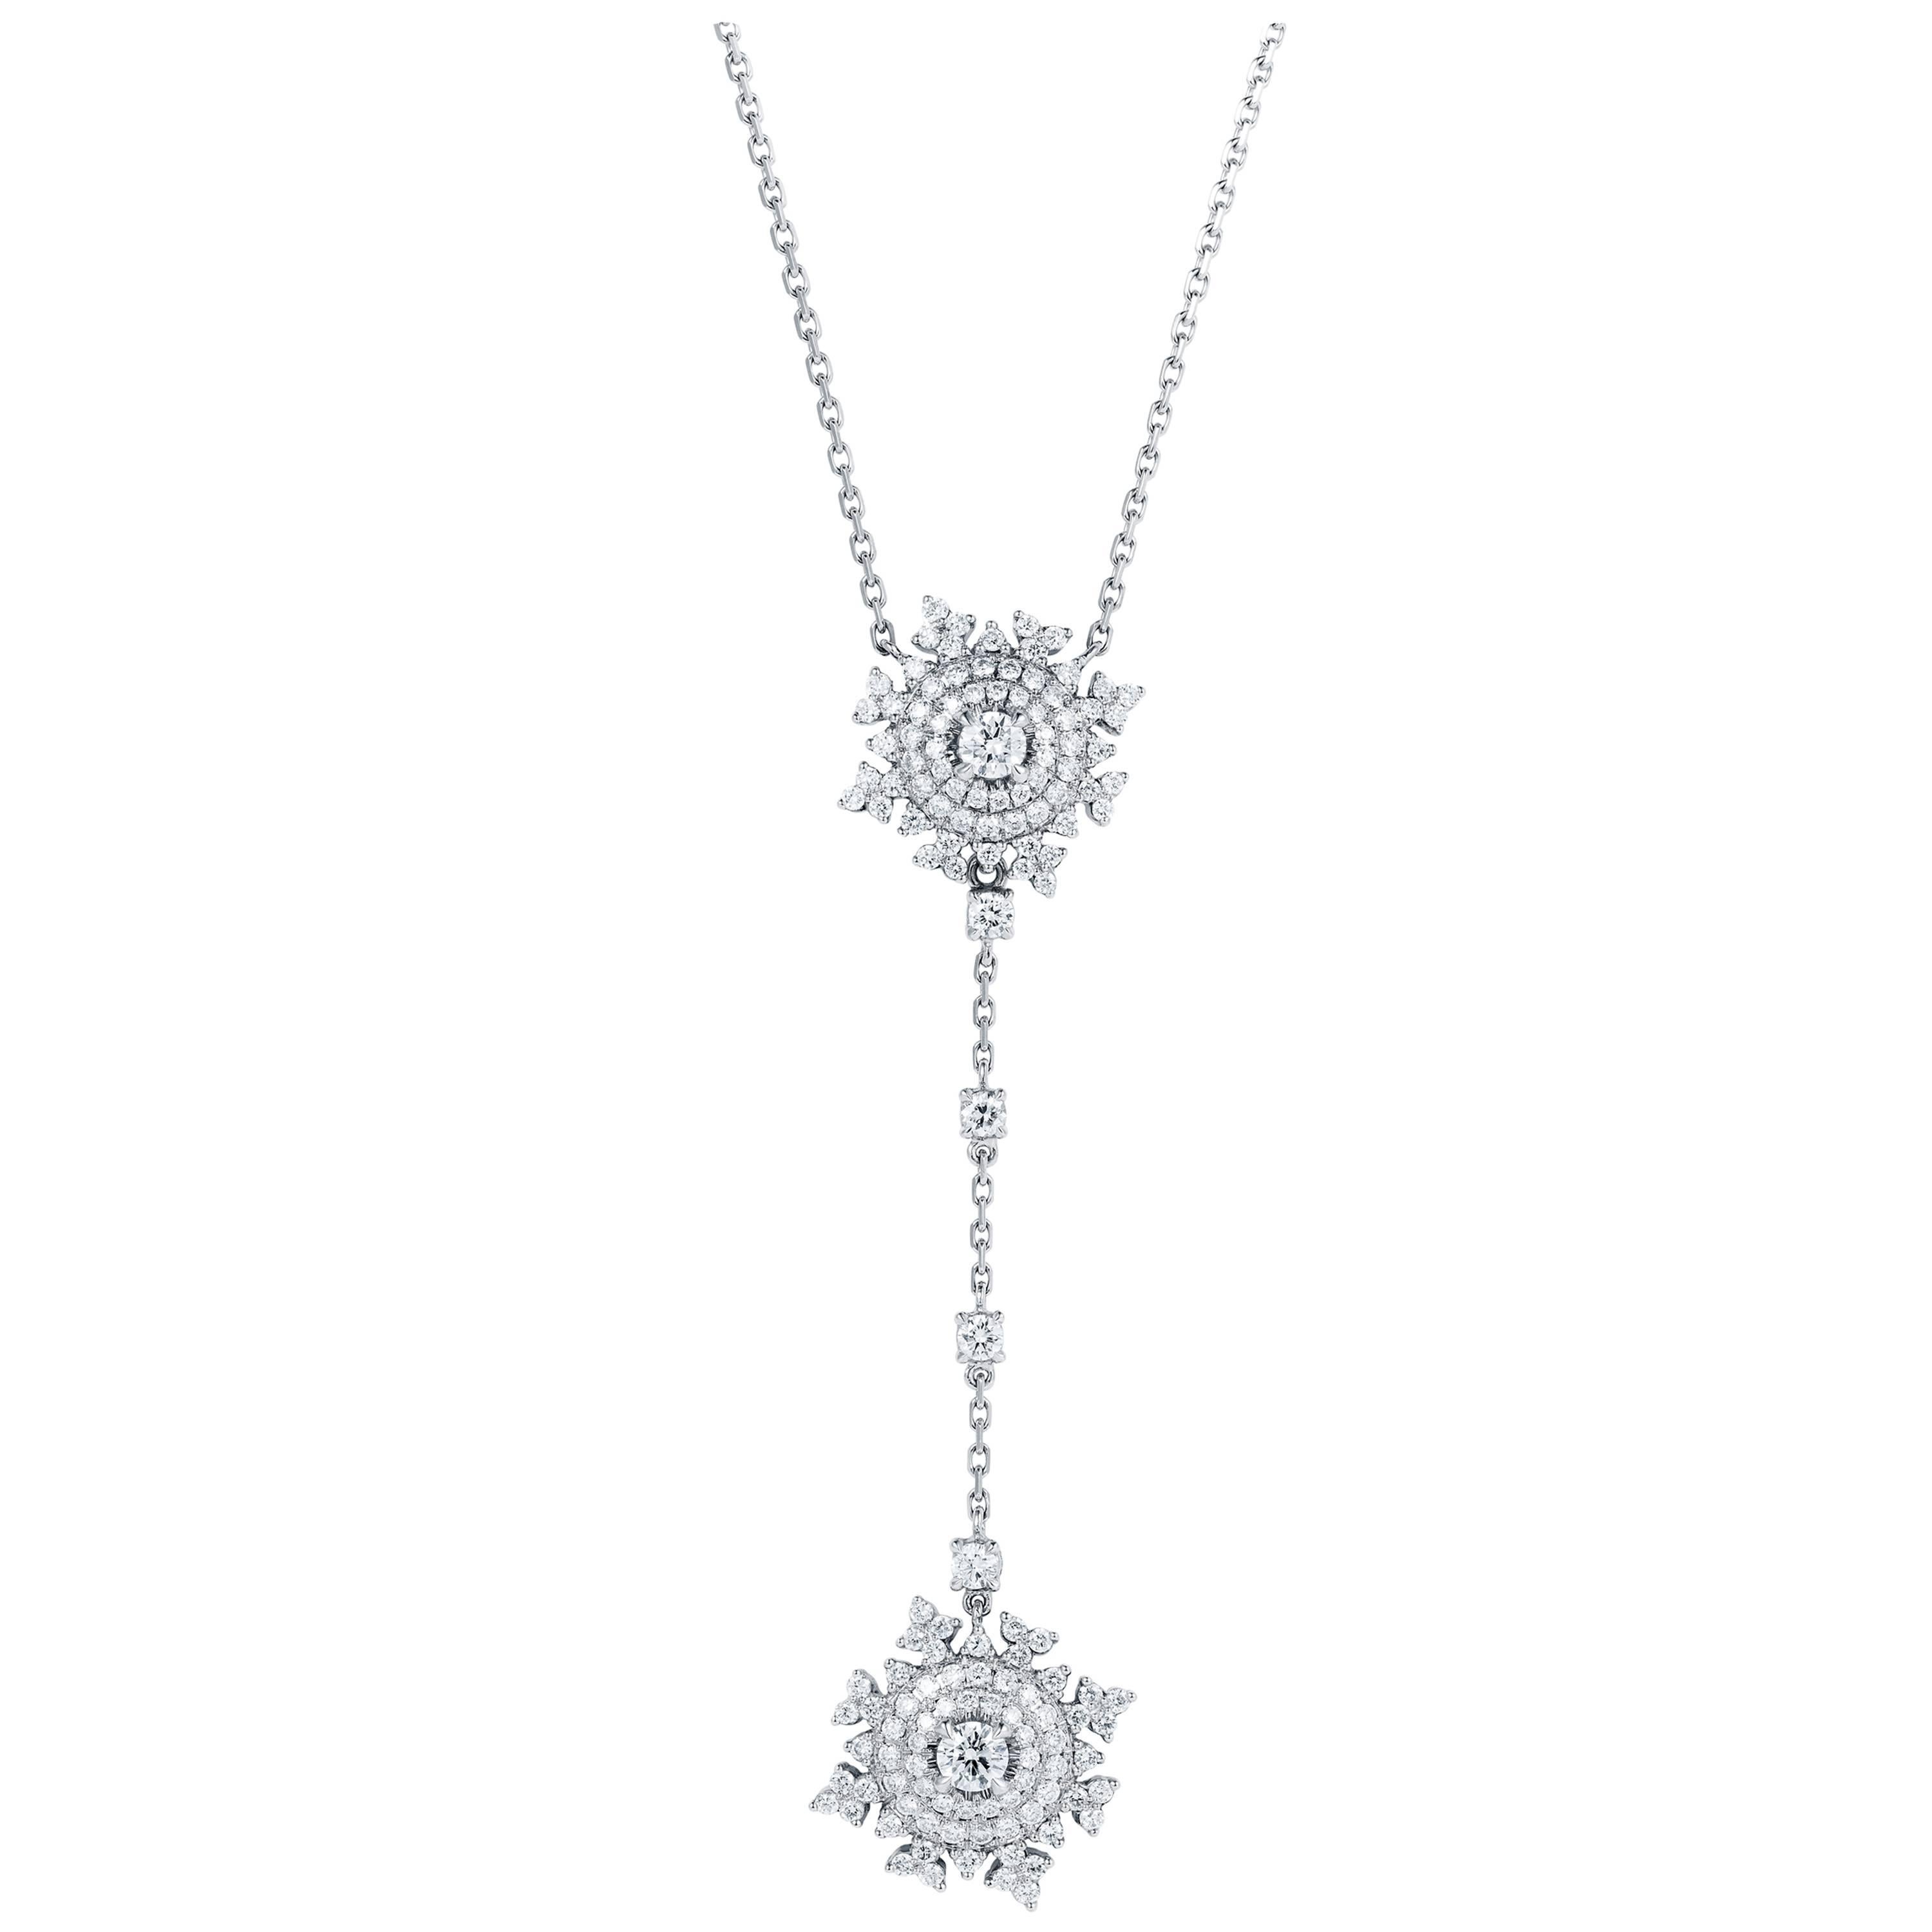 Nadine Aysoy Petite Tsarina 18K White Gold with Diamond Necklace with Pendant For Sale